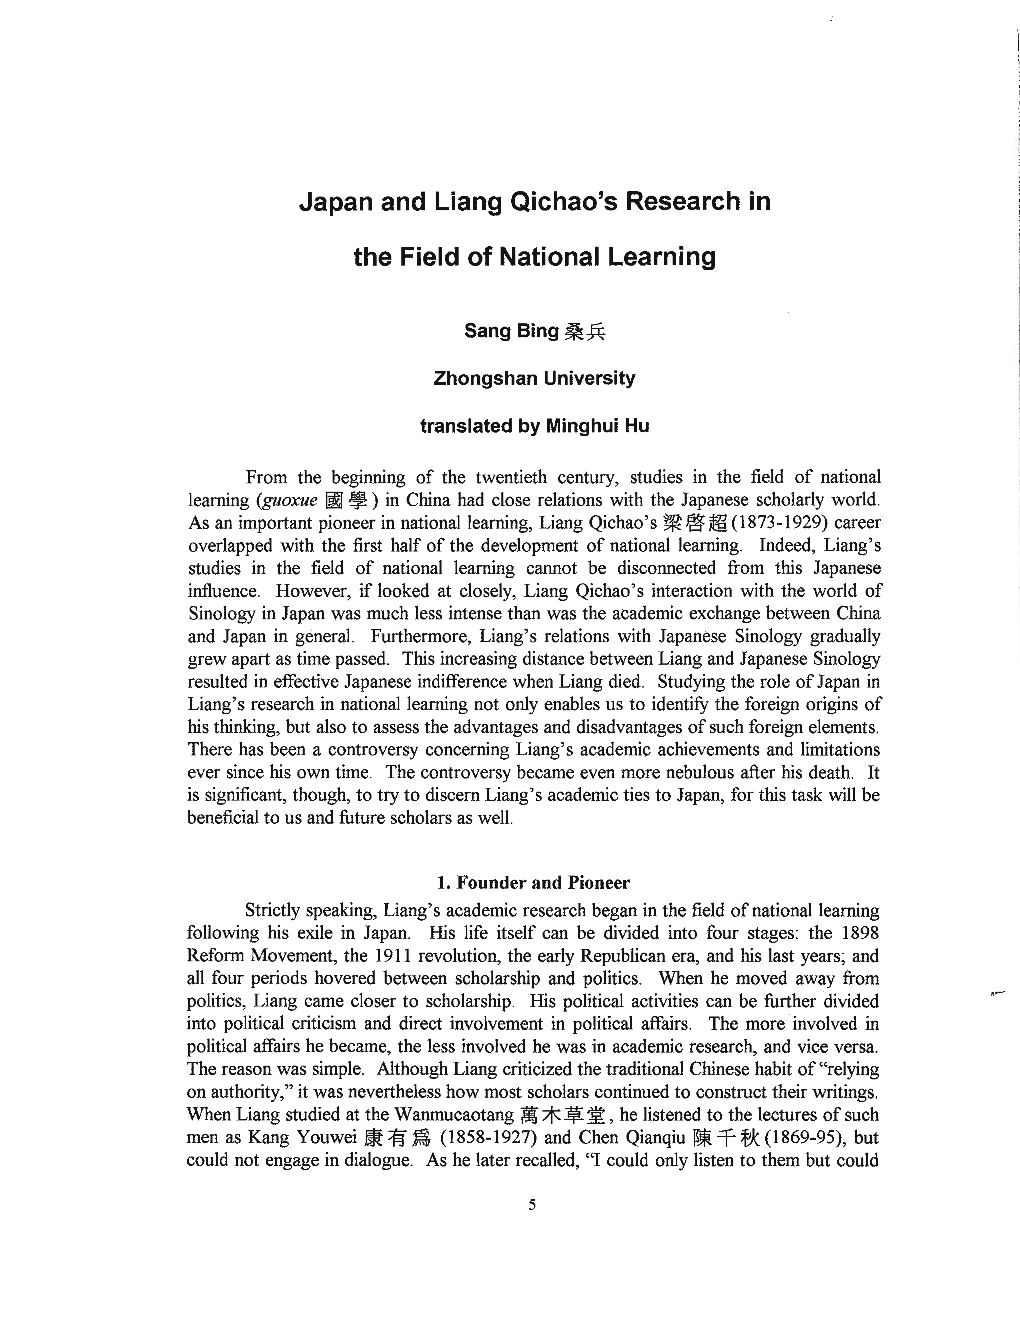 Japan and Liang Qichao's Research in the Field of National Learning